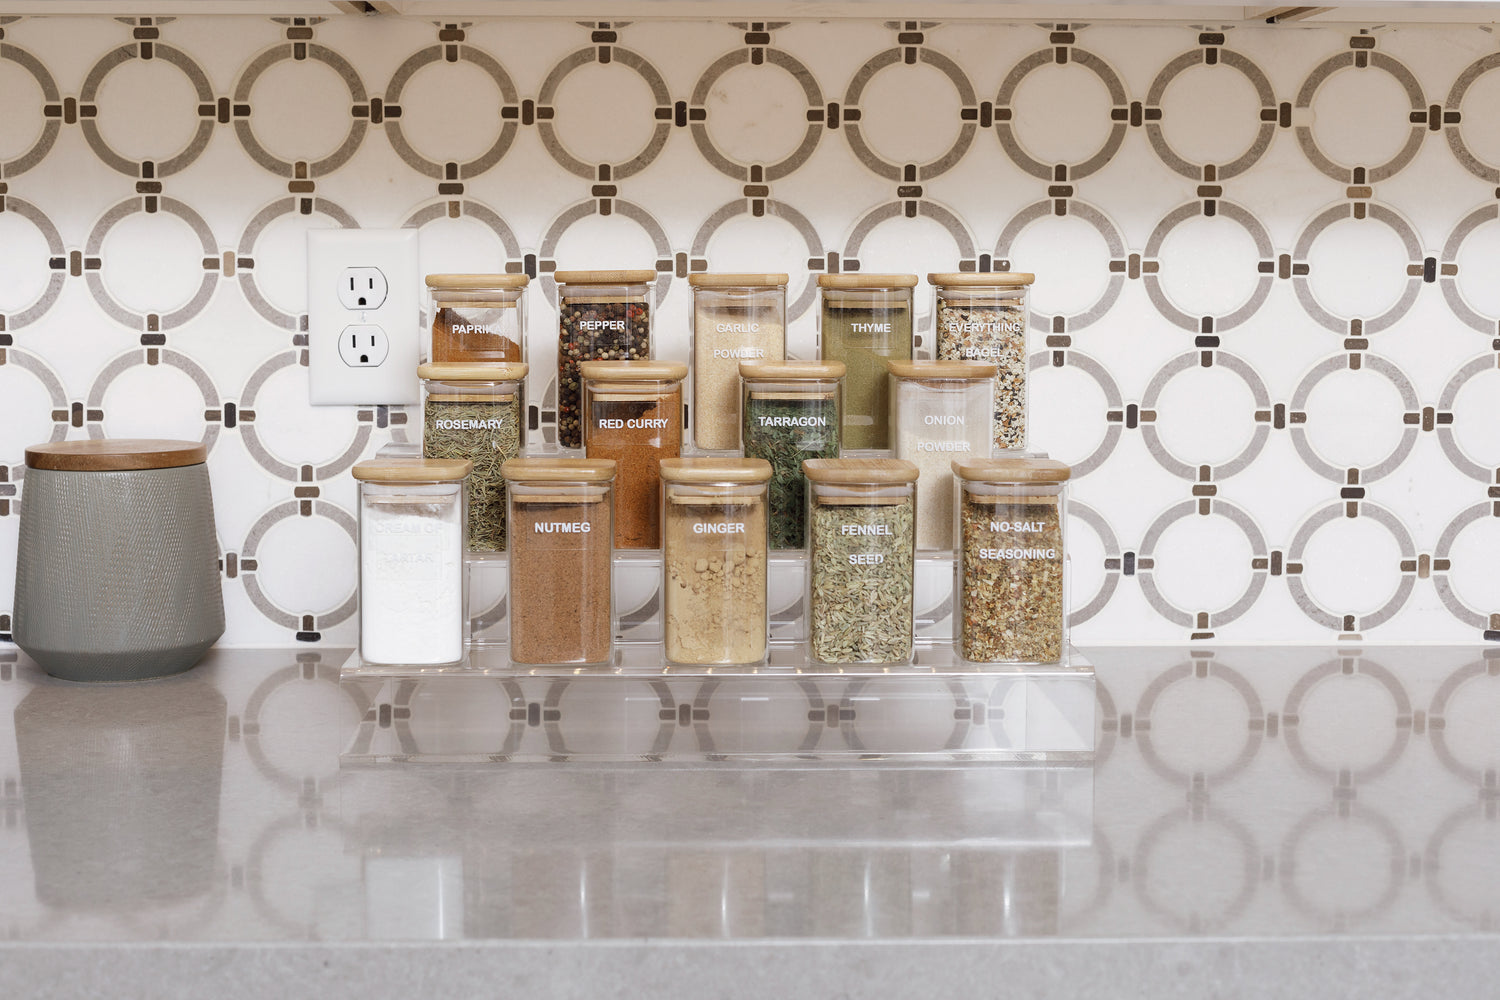 Stunning acrylic spice rack holding a variety of spices in clear containers.